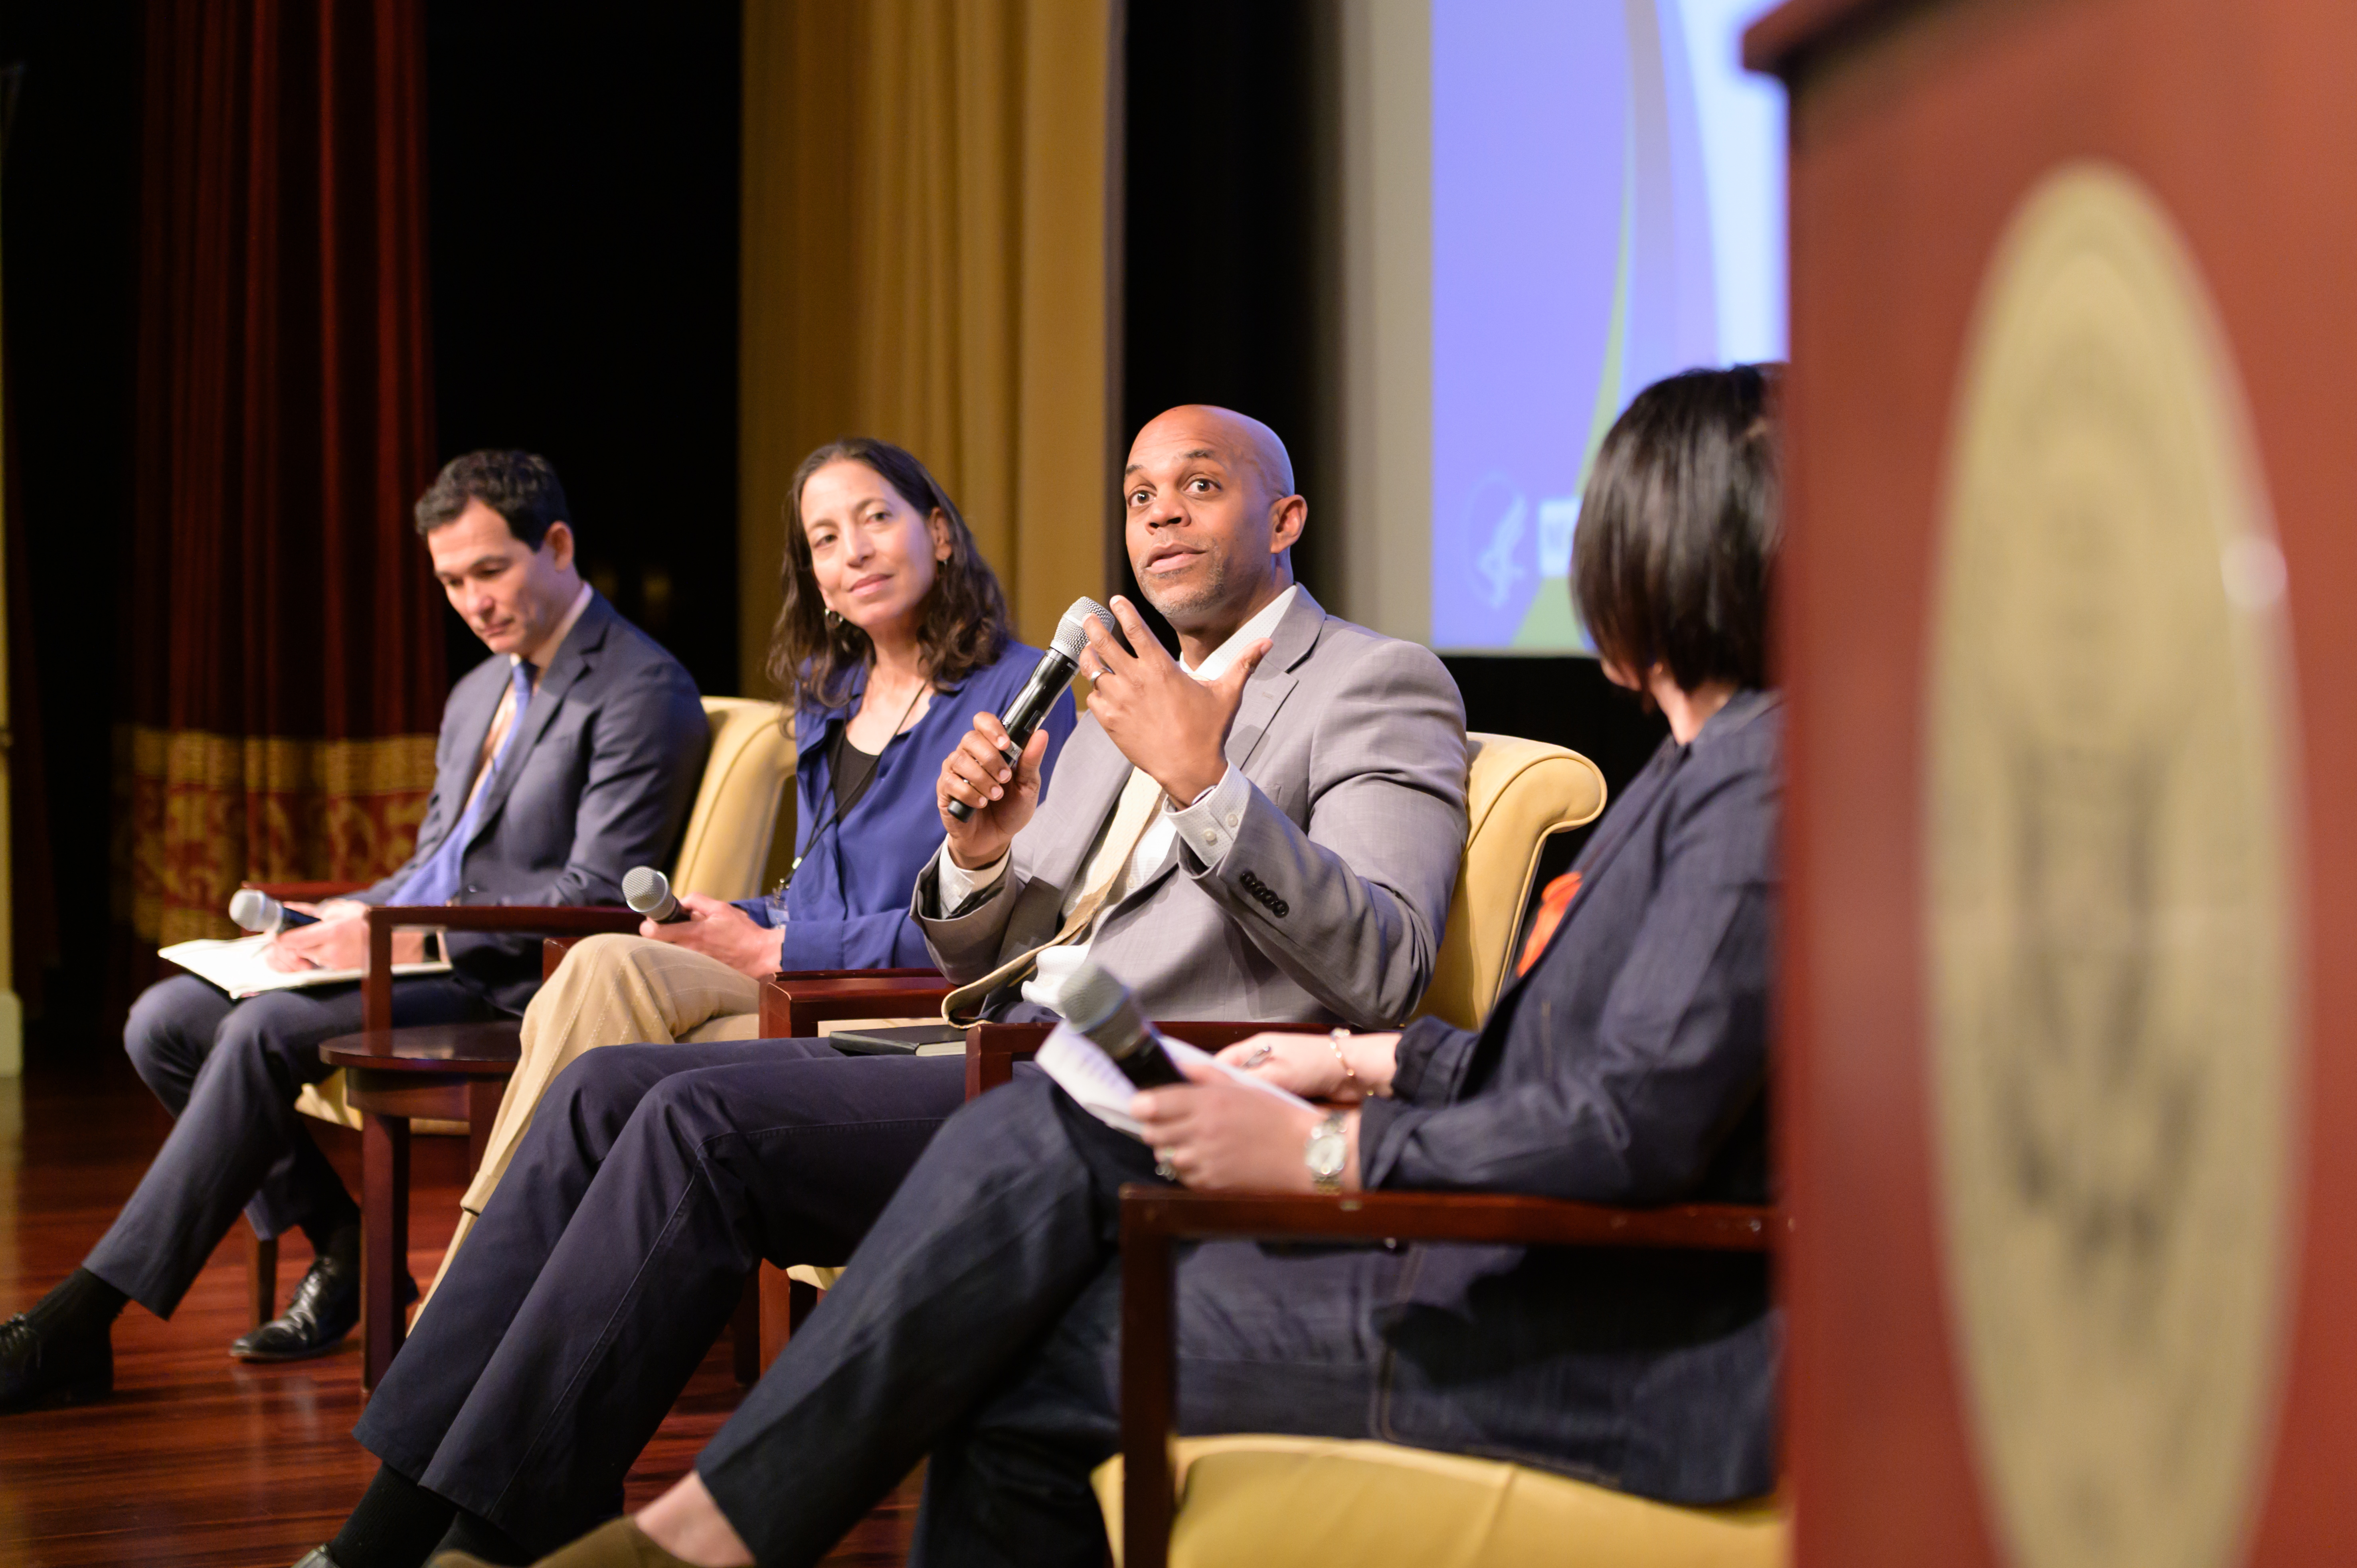 Four people are sitting on a stage in a panel discussion. The person speaking into a microphone is in the center, with three others listening attentively. They are in a formal setting, possibly a conference or seminar.